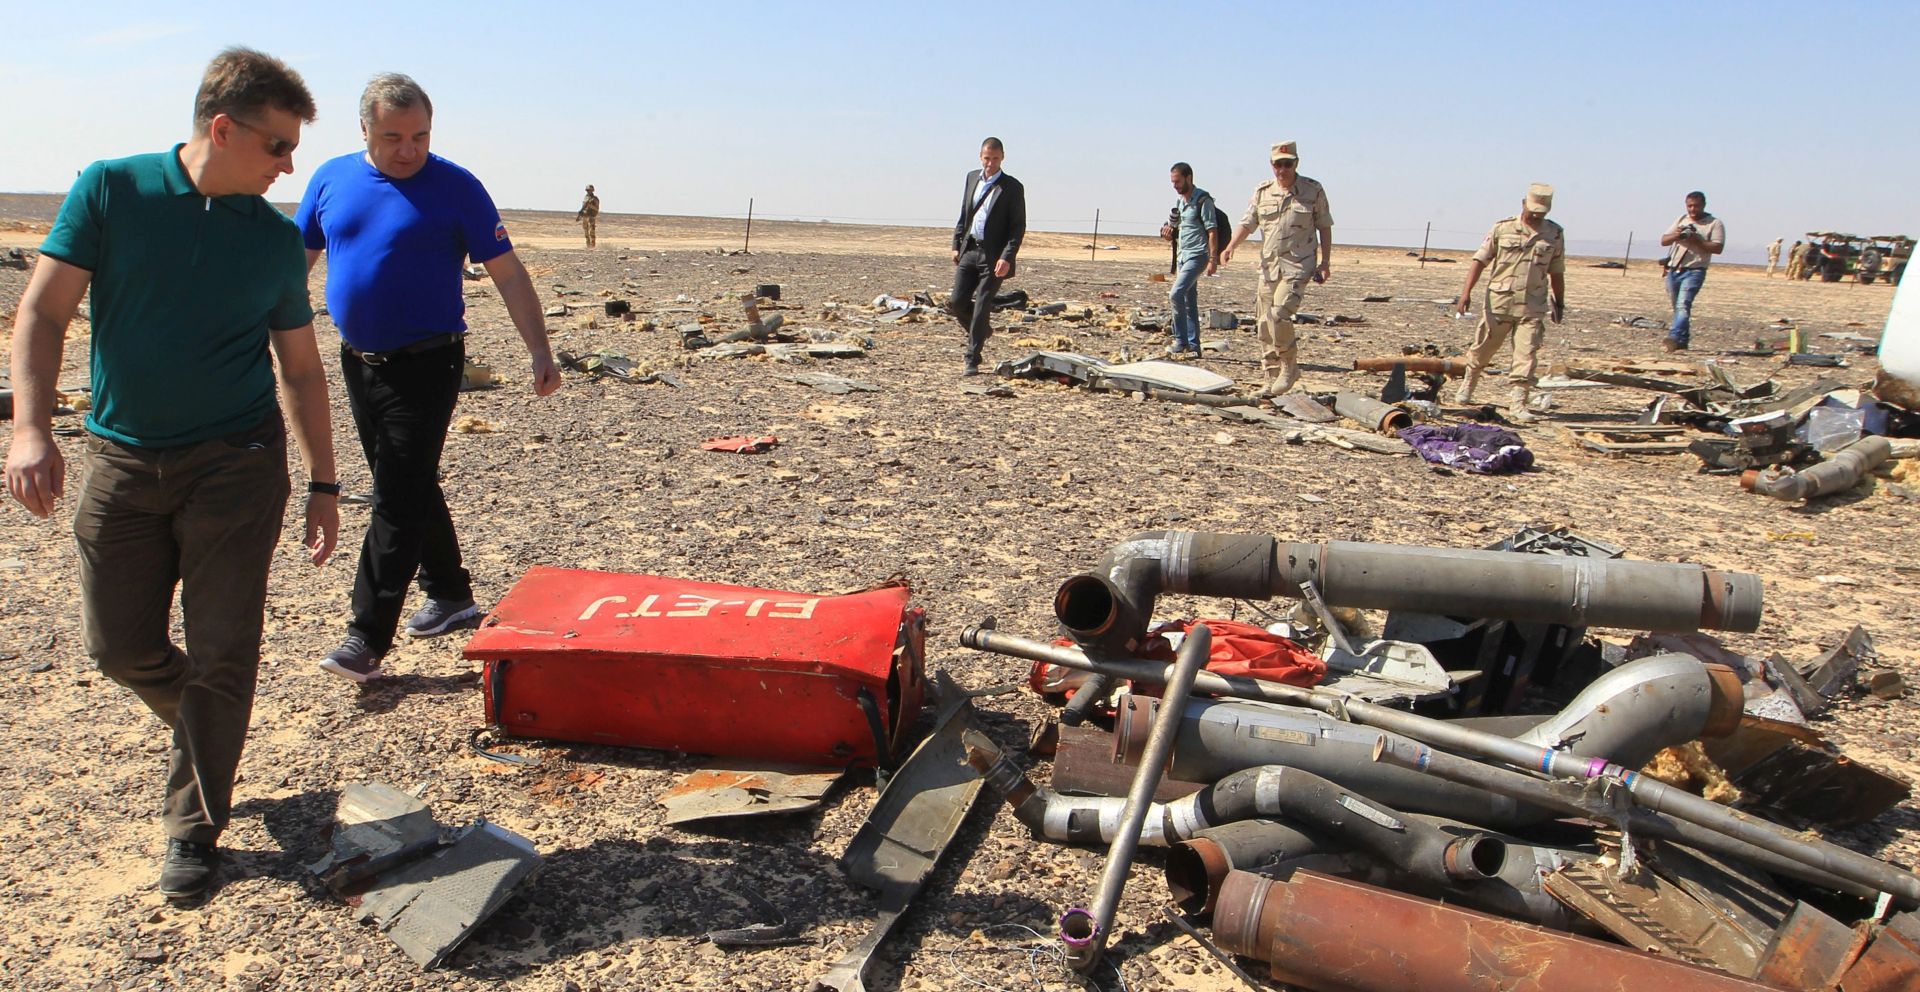 epa05006023 Russian Minister of Transportation Maksim Yuryevich Sokoldv (L) and Minister for Civil Defense, Emergencies and Natural Disasters, Puchkov Vladimir Andreevich (2-L) walk near debris from crashed Russian jet at the site of the crash in Sinai, Egypt, 01 November 2015. Russian officials and experts flew to Egypt's Sinai on 01 November, a day after a Russian passenger airliner crashed in the largely desert peninsula killing all 224 people on board.  EPA/KHALED ELFIQI